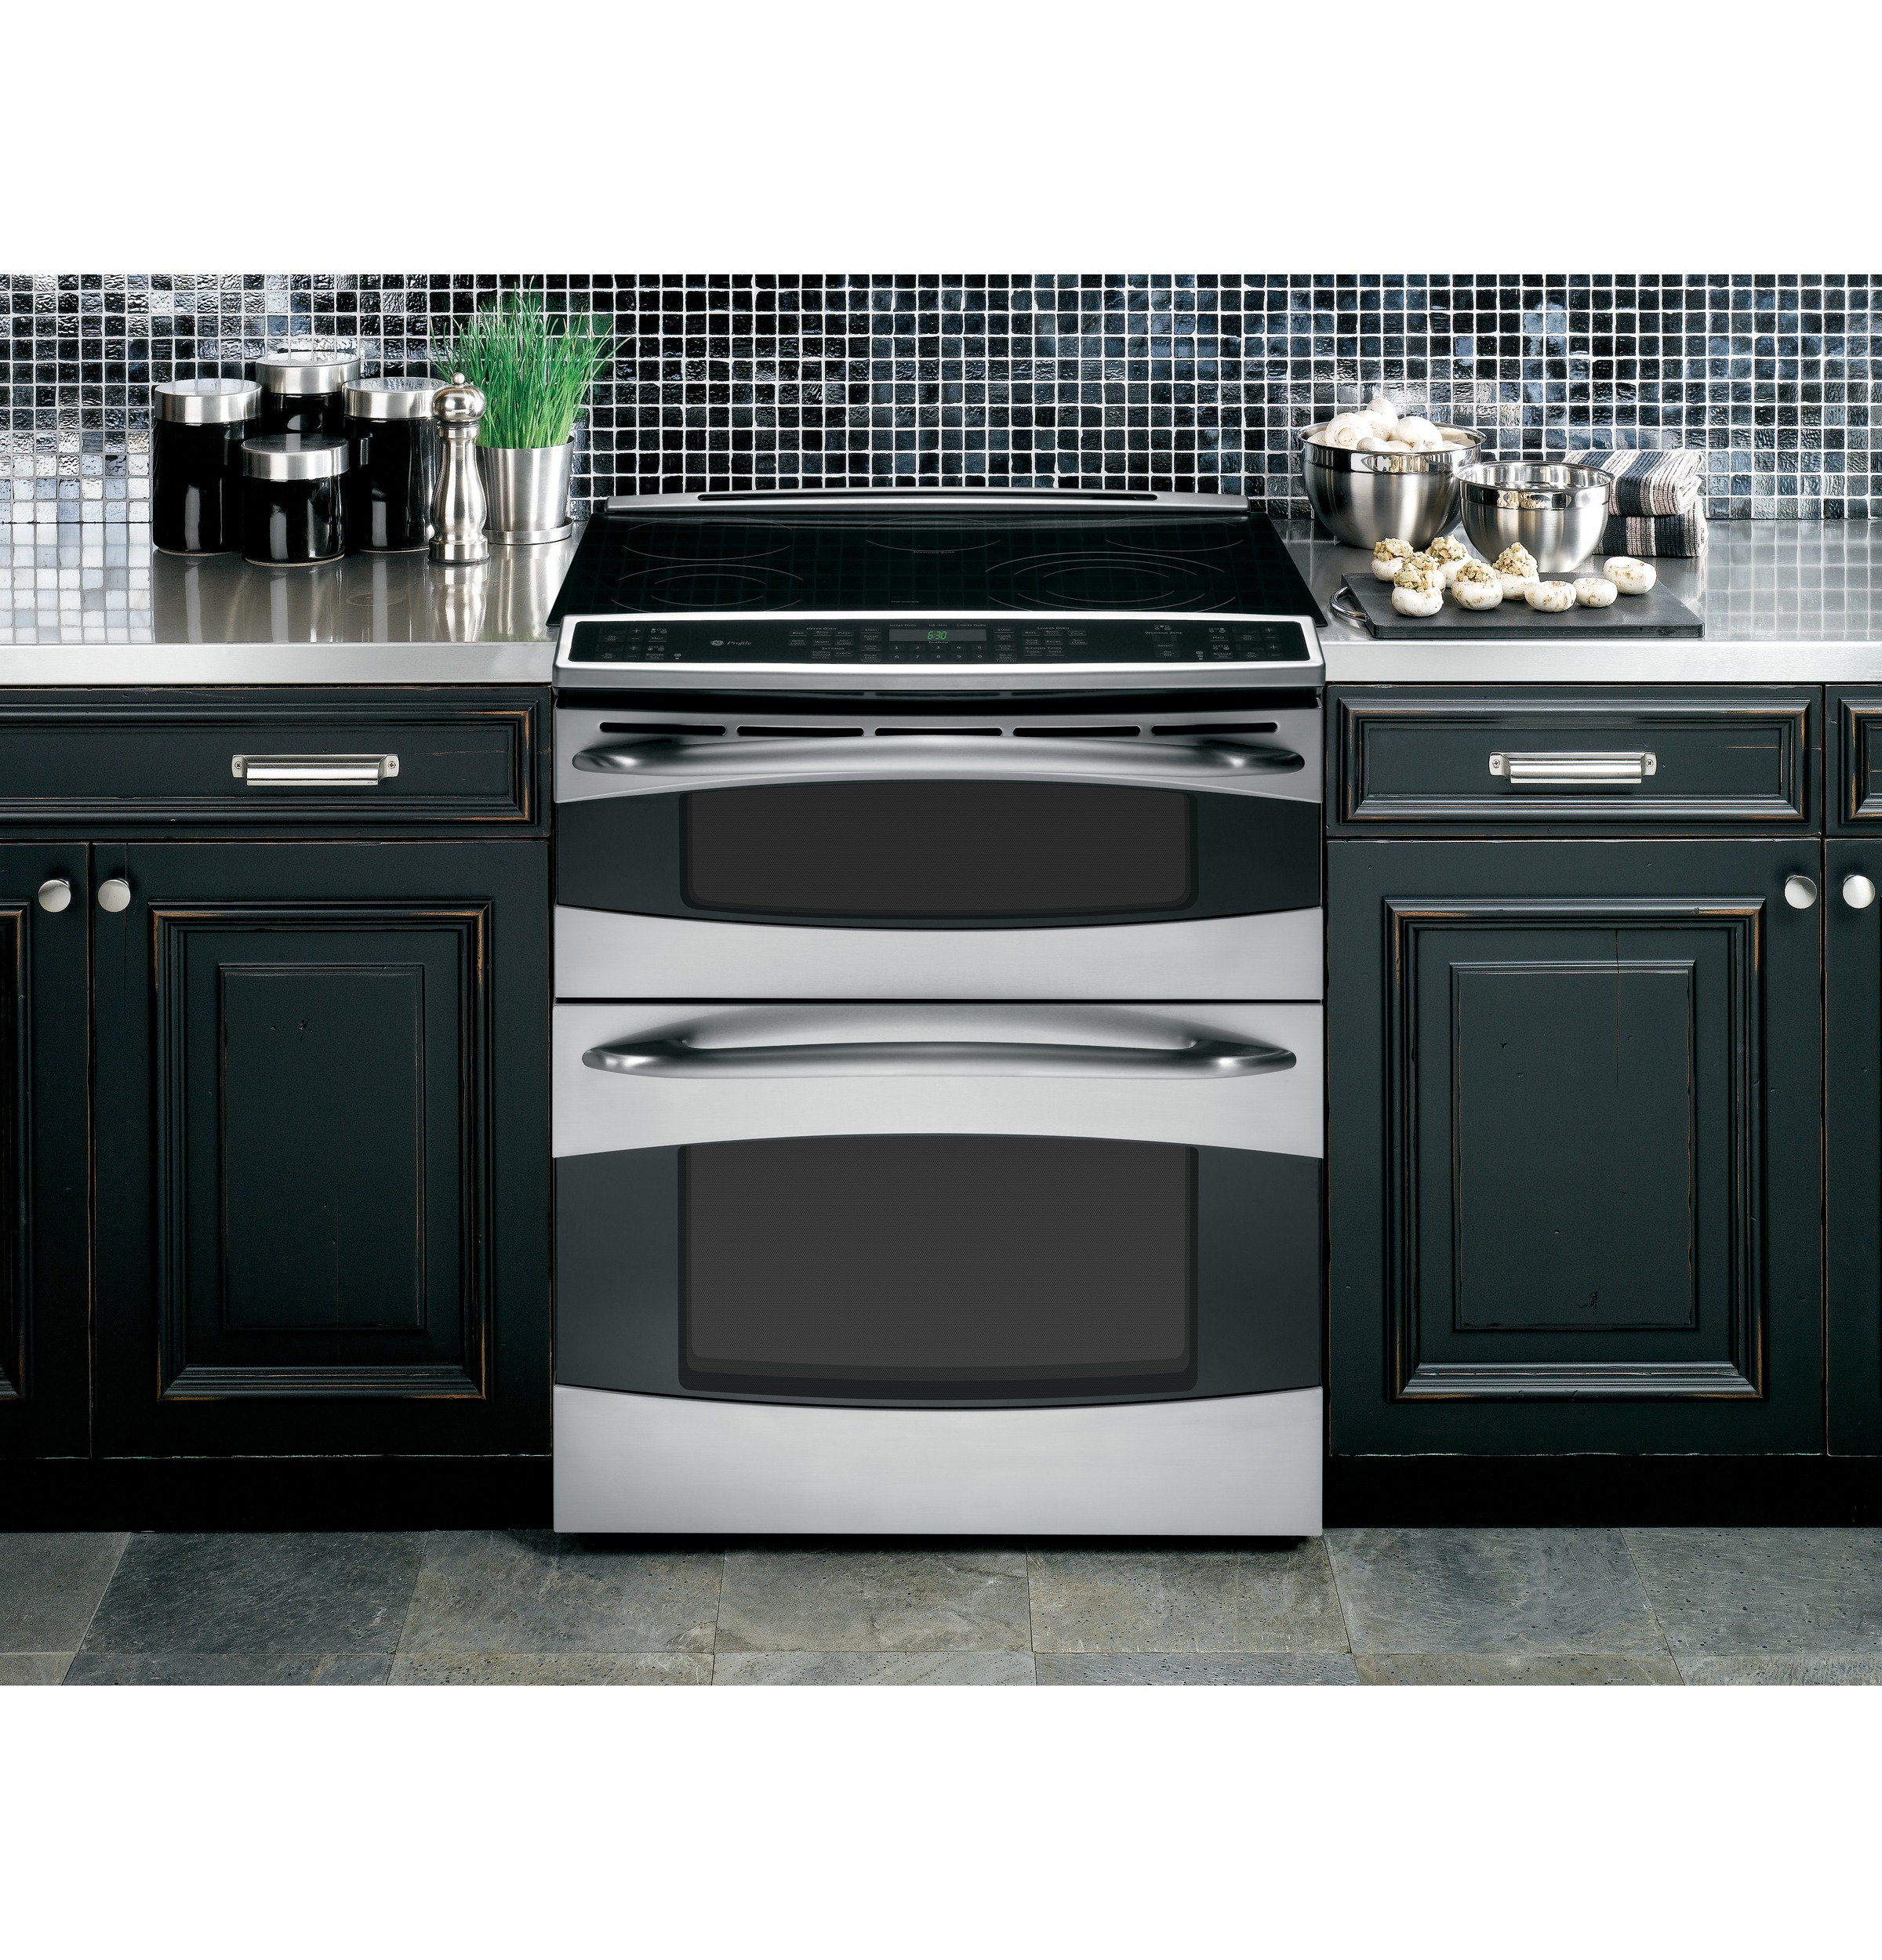 GE Profile™ Slide-In Double Oven Electric Range